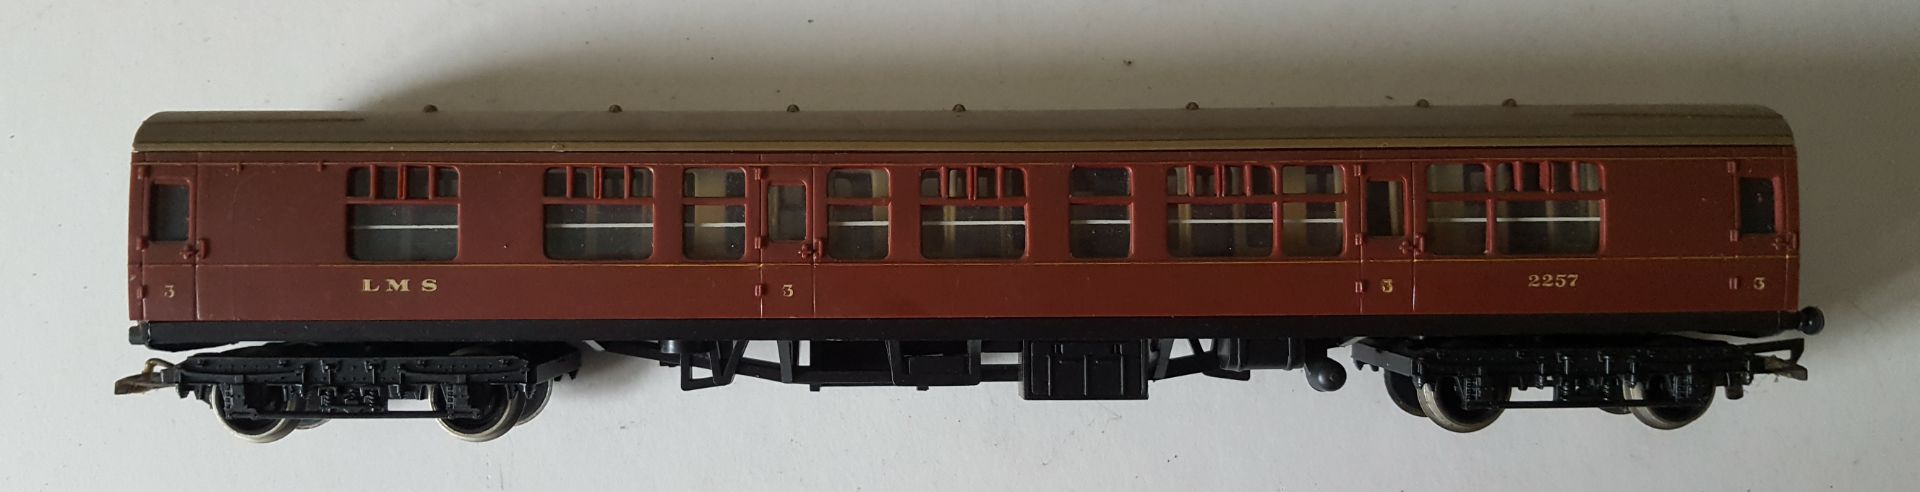 Vintage Retro 3 x Model Train Coaches 00 Guage Tri-ang & Hornby - Image 2 of 5